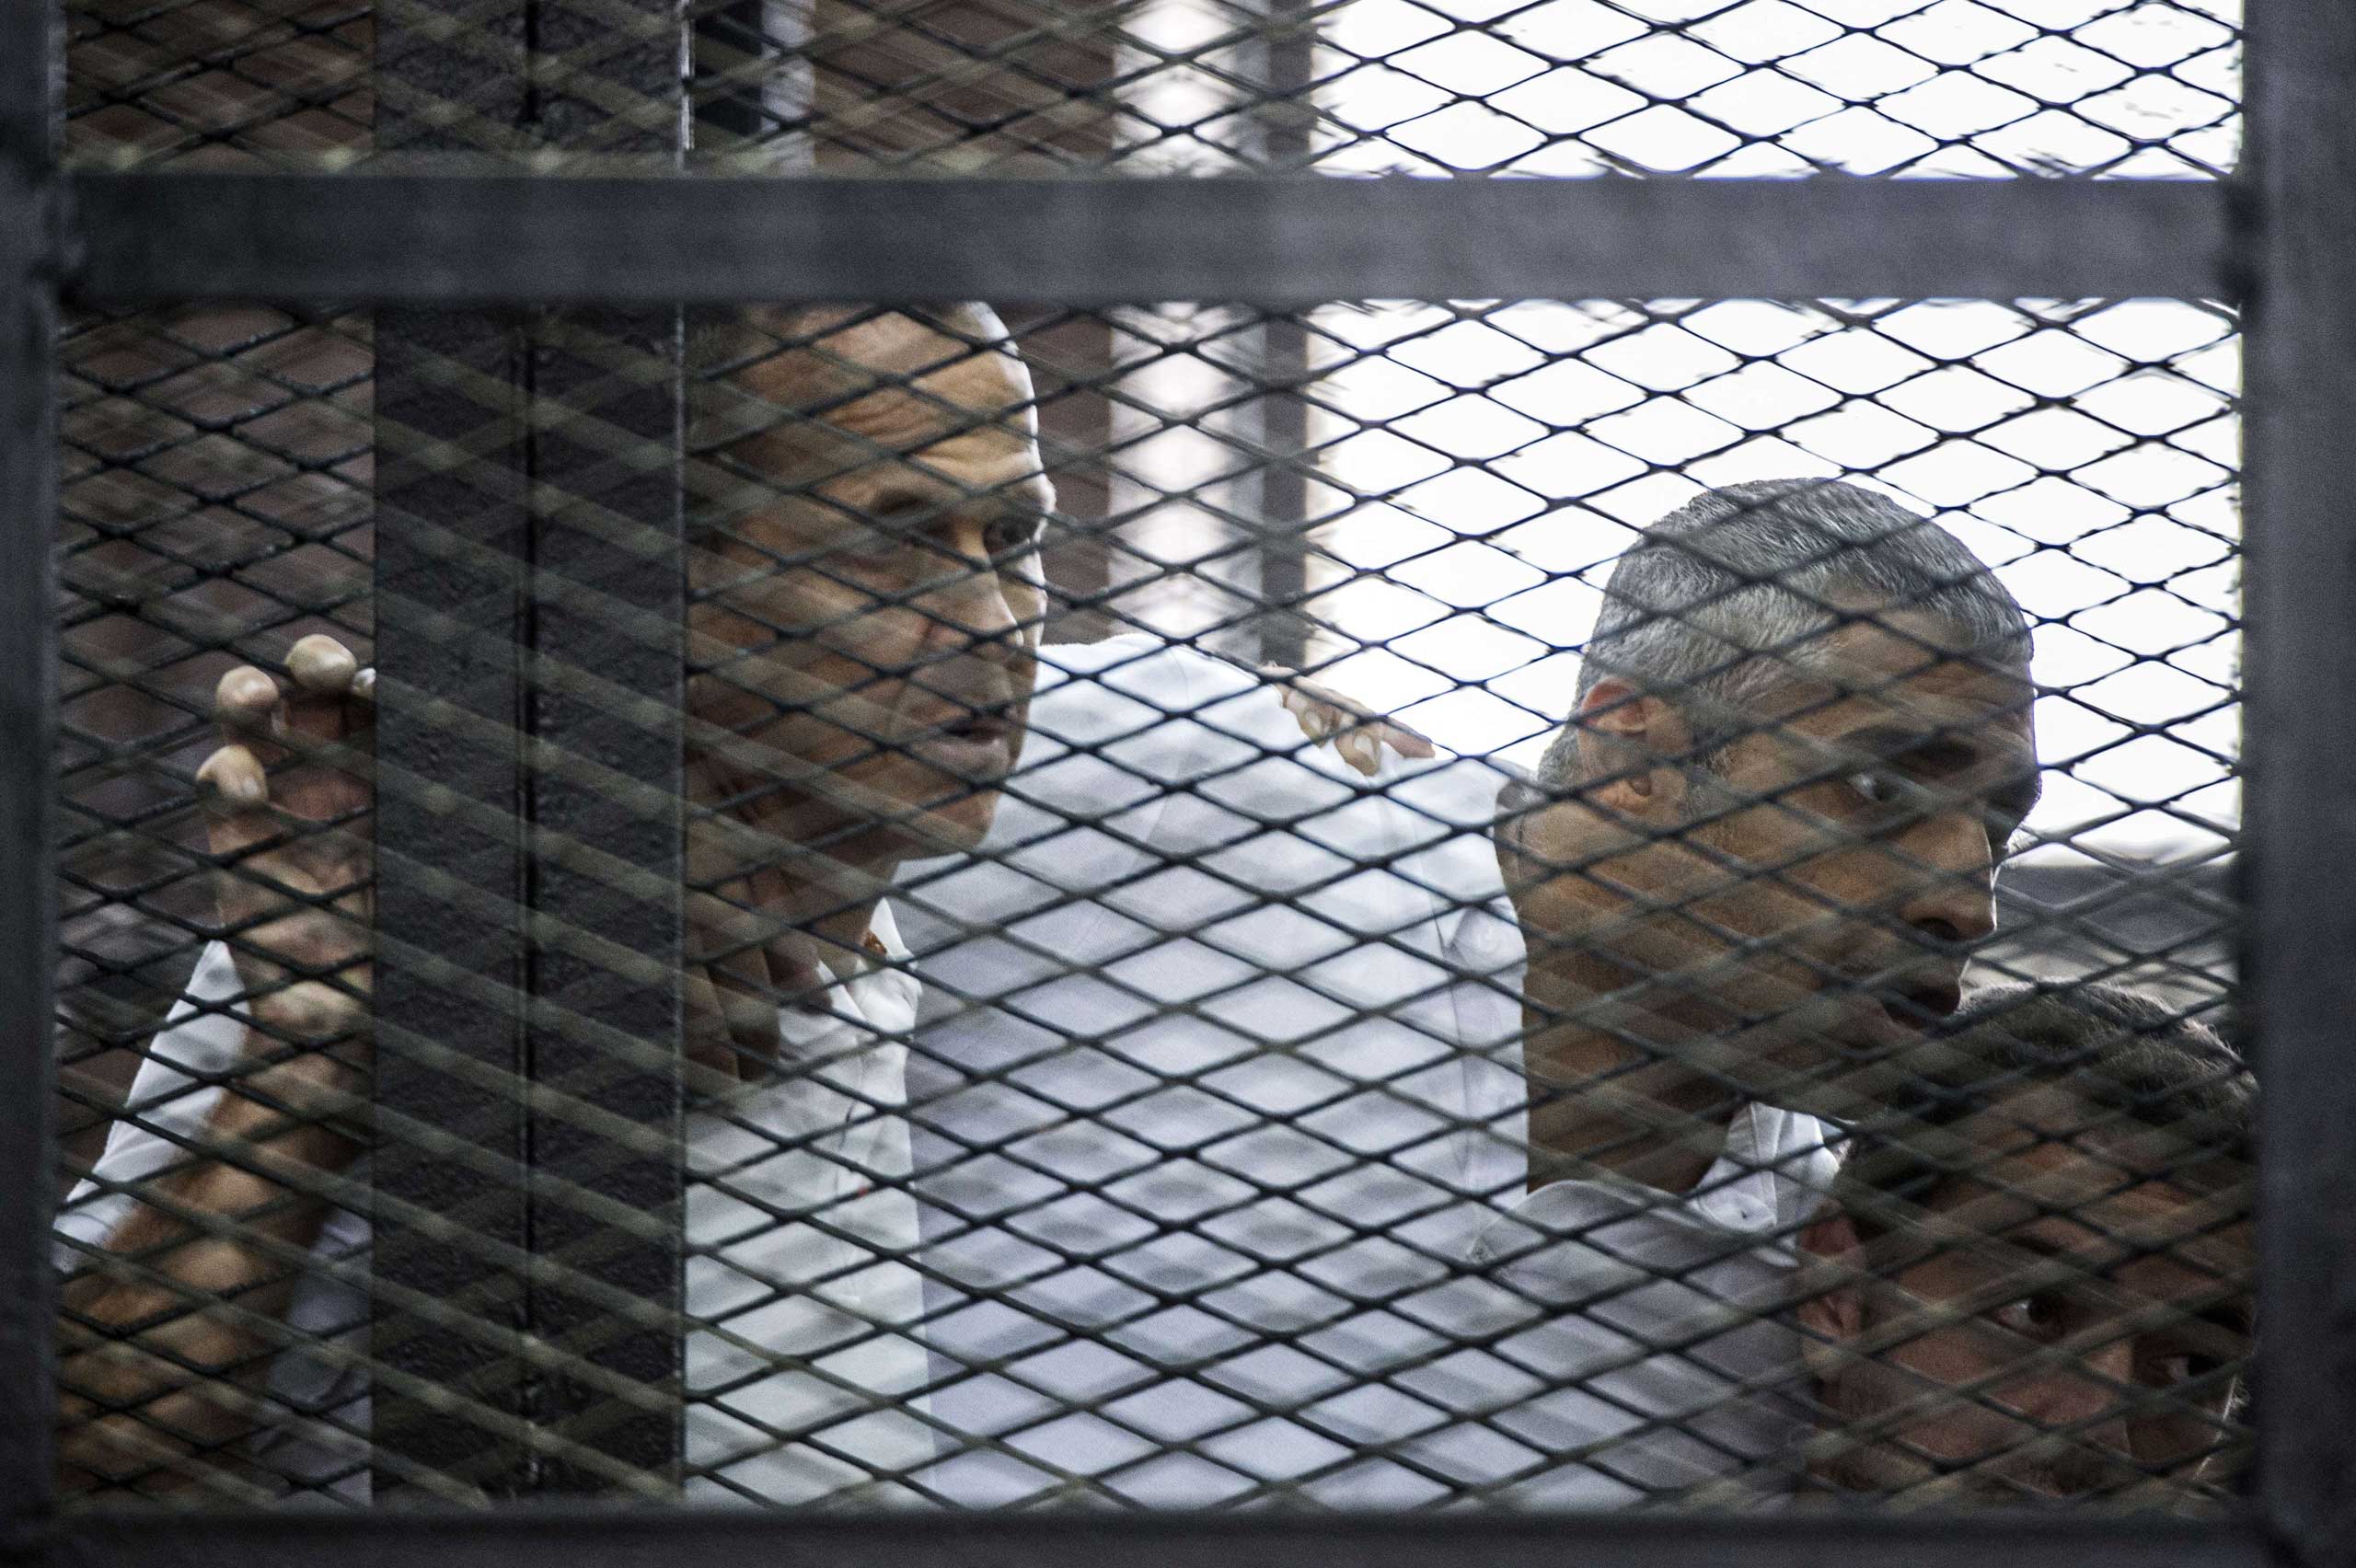 Al-Jazeera news channel's Australian journalist Peter Greste (L) and his colleagues, Egyptian-Canadian Mohamed Fadel Fahmy (C) and Egyptian Baher Mohamed, listen to the verdict inside the defendants cage during their trial at Tora prison in Cairo on June 23, 2014. (Khaled Desouki—AFP/Getty Images)